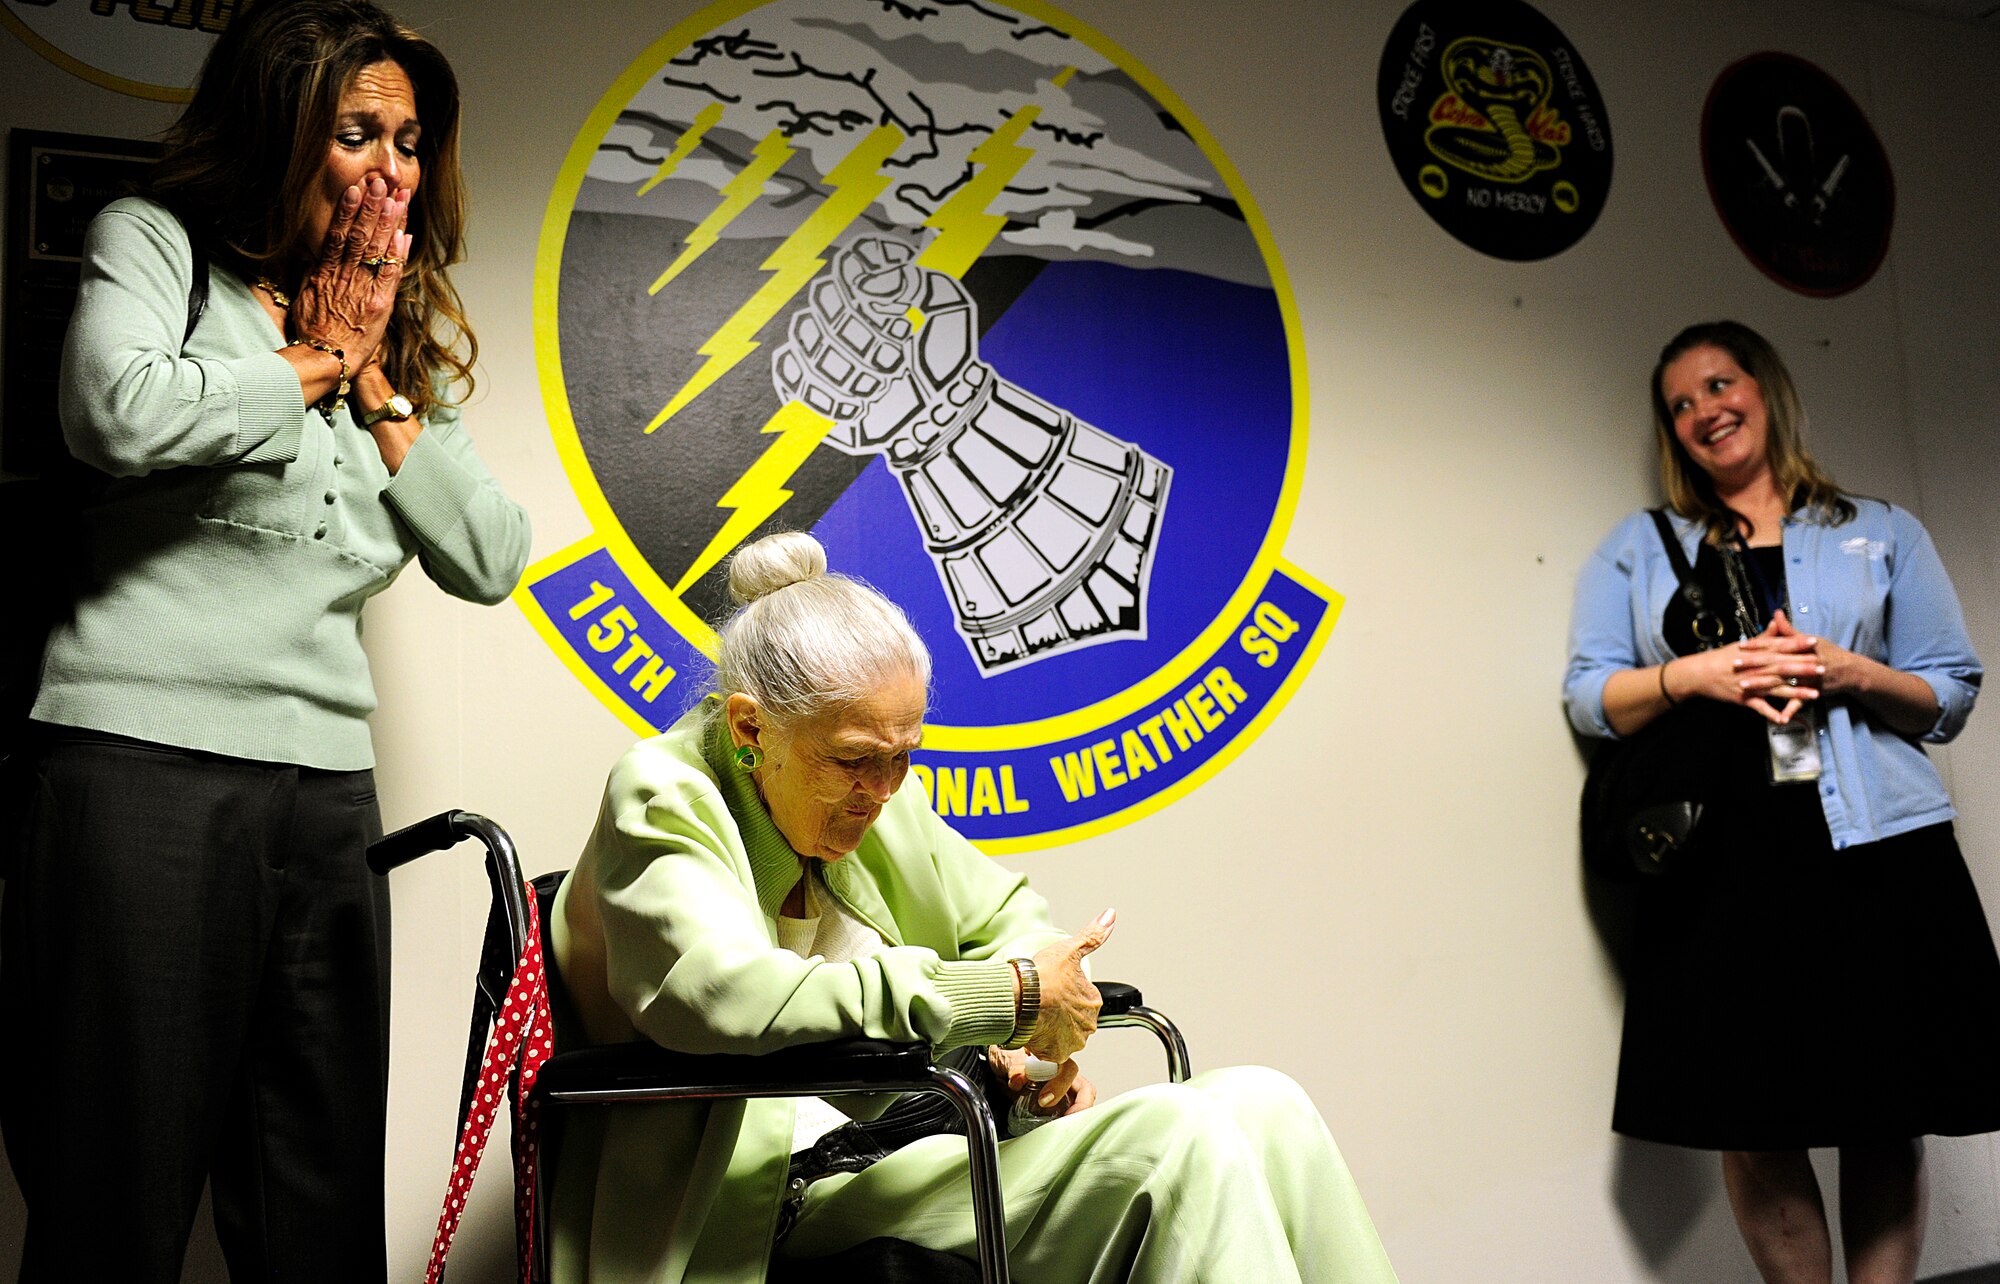 Norma Cadena admires a squadron coin she received from Lt. Col. Danielle Budzko, 15th Operational Weather Squadron commander, during her visit to the squadron at Scott Air Force Base, Ill., June 26, 2015. After she received the coin she kept asking members if they wanted to see it, but wouldn’t let anyone hold it. (U.S. Air Force photo/Staff Sgt. Stephenie Wade) 